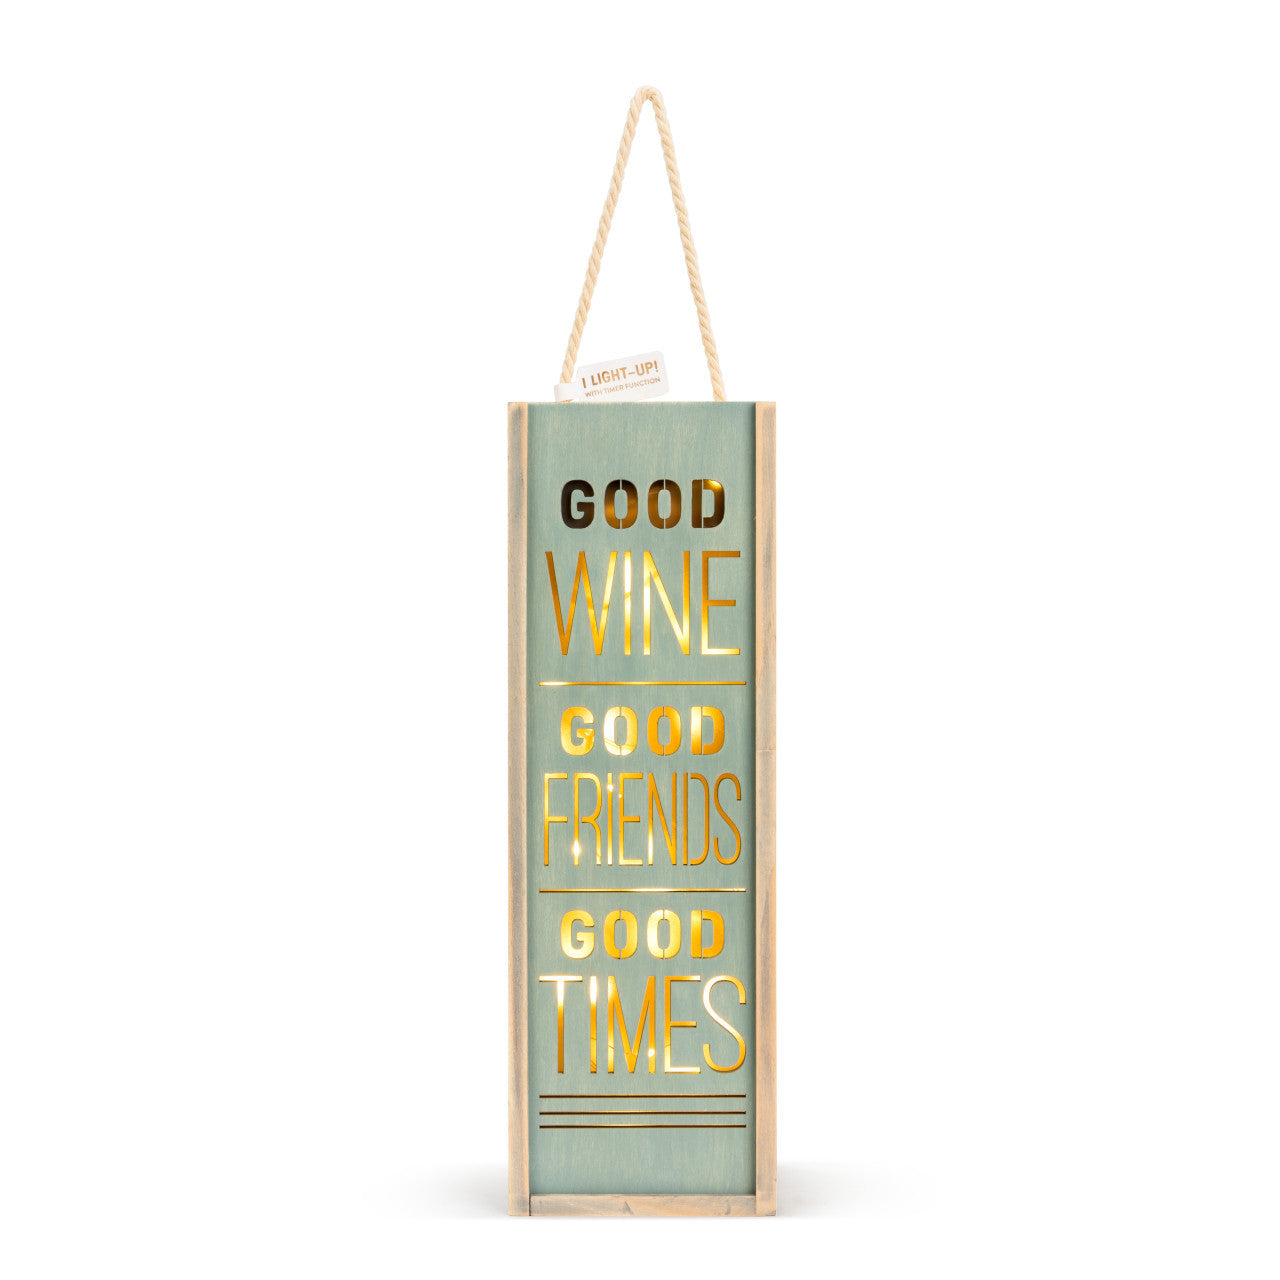 Demdaco Good Wine & Good Friends Lantern available at The Good Life Boutique